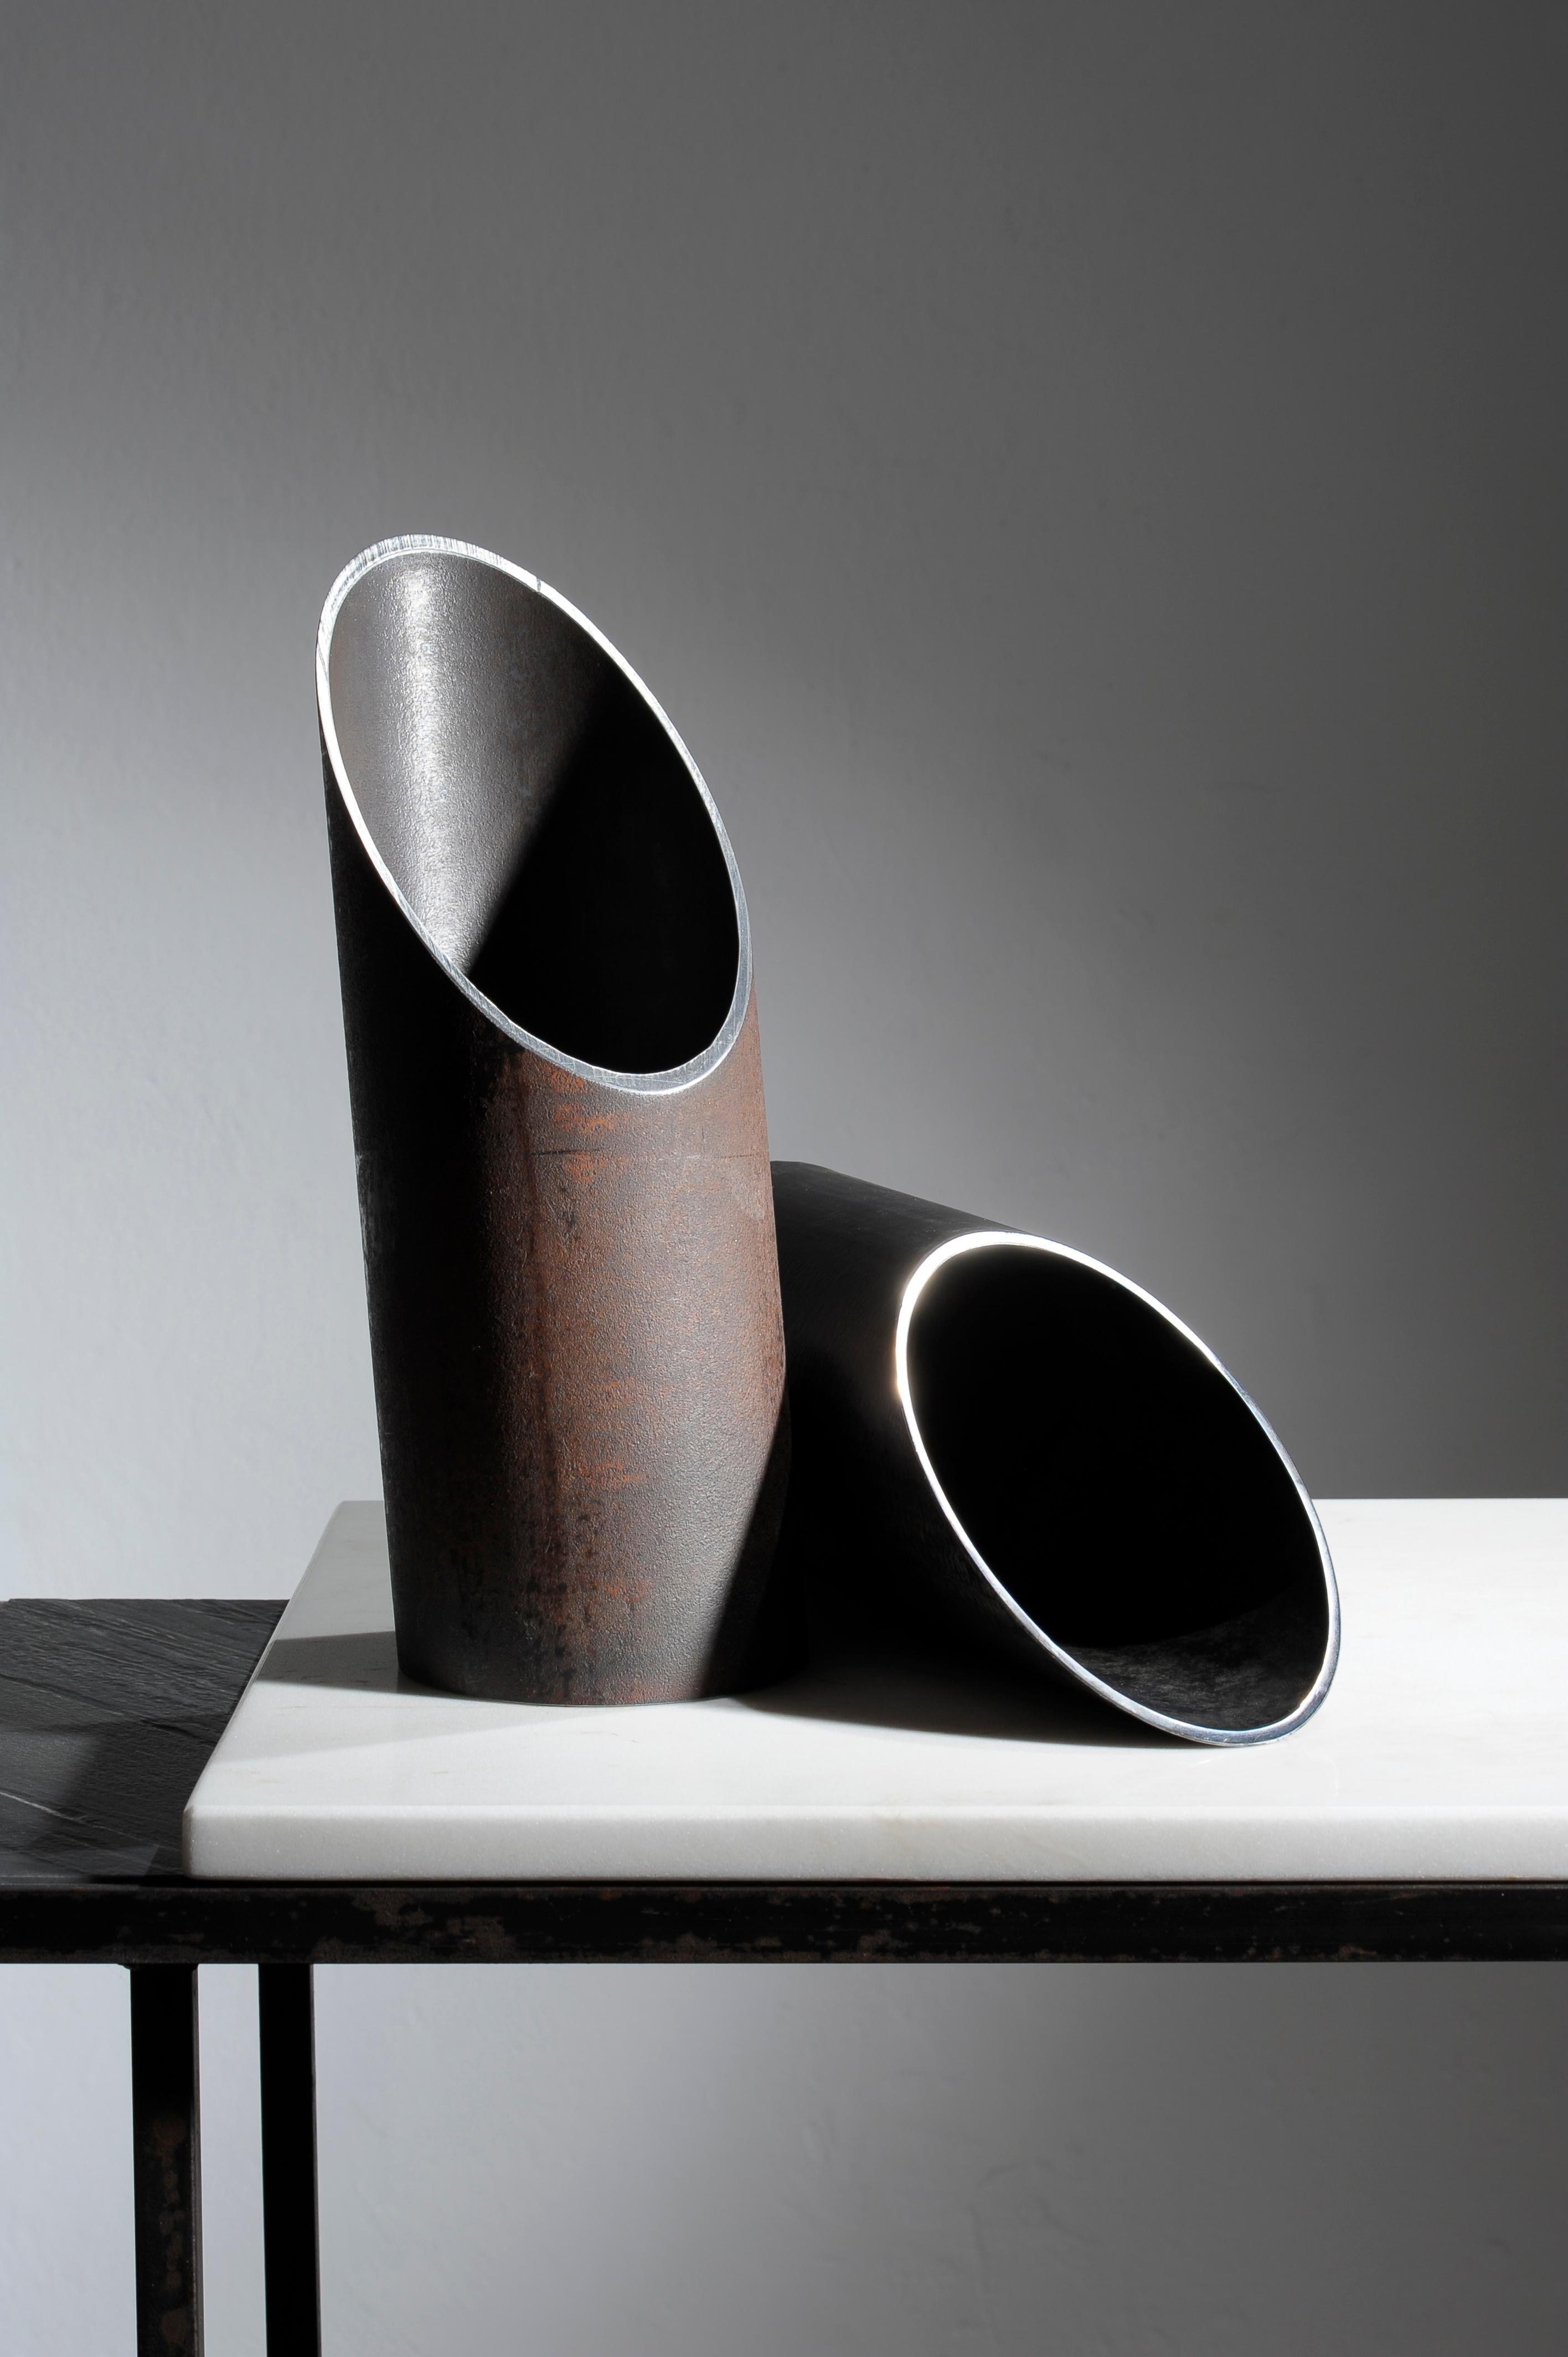 Pipe,Pair of Steel Sculpted Vases, Signed by Lukasz Friedrich
Steel vases “Pipe”
Dimensions: D 12 x H 30 cm
Finish: black or rusty patina on steel, wax
Unique and signed.